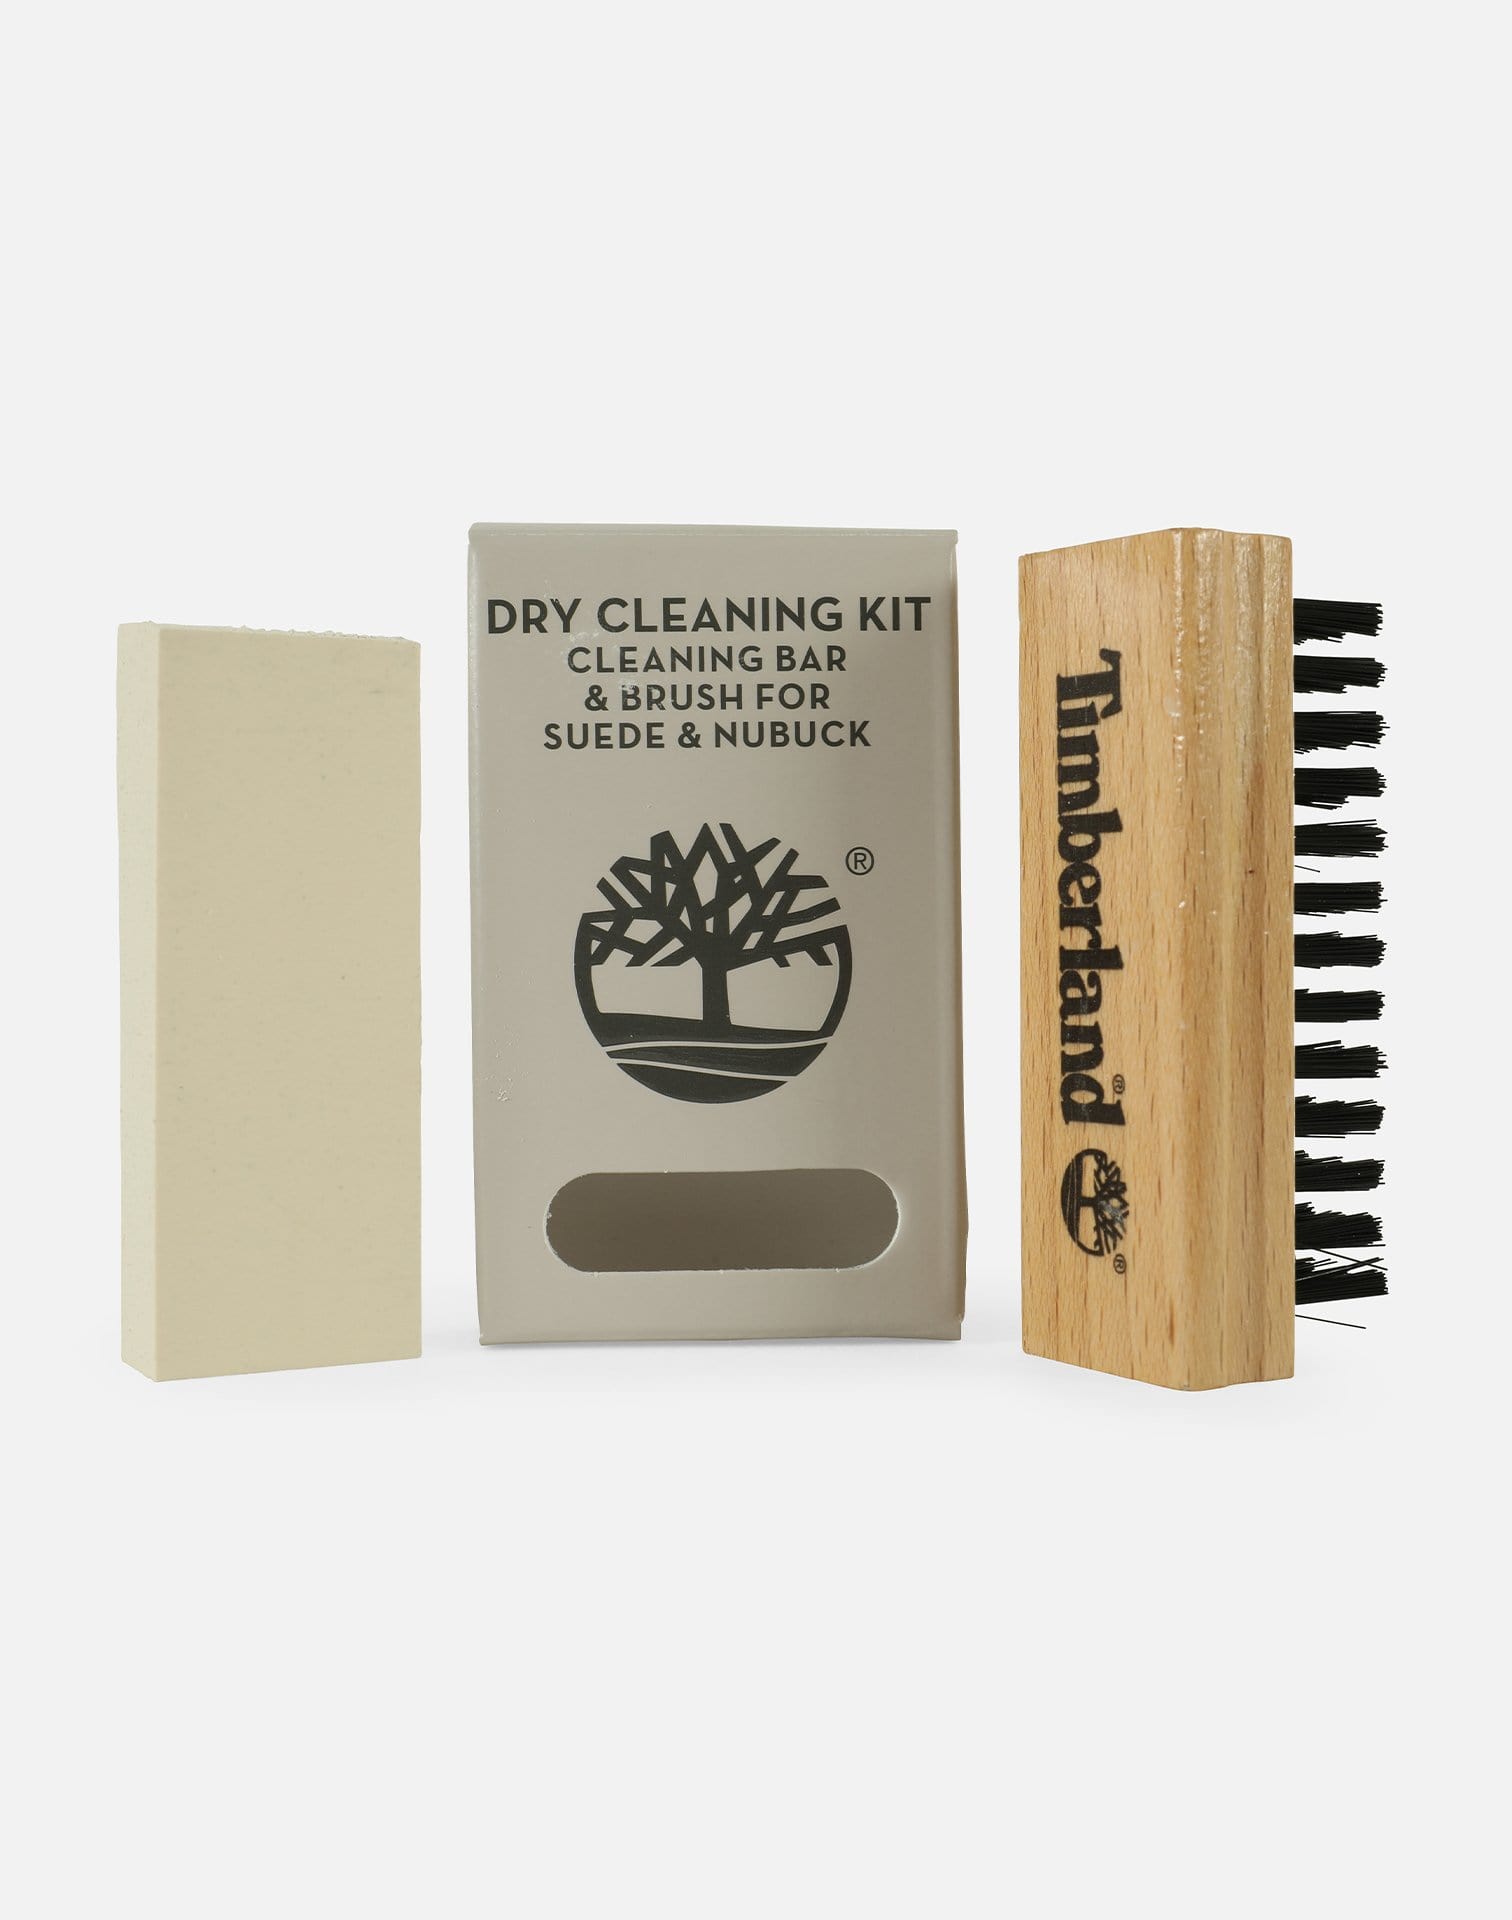 Timberland - Dry Cleaning Kit